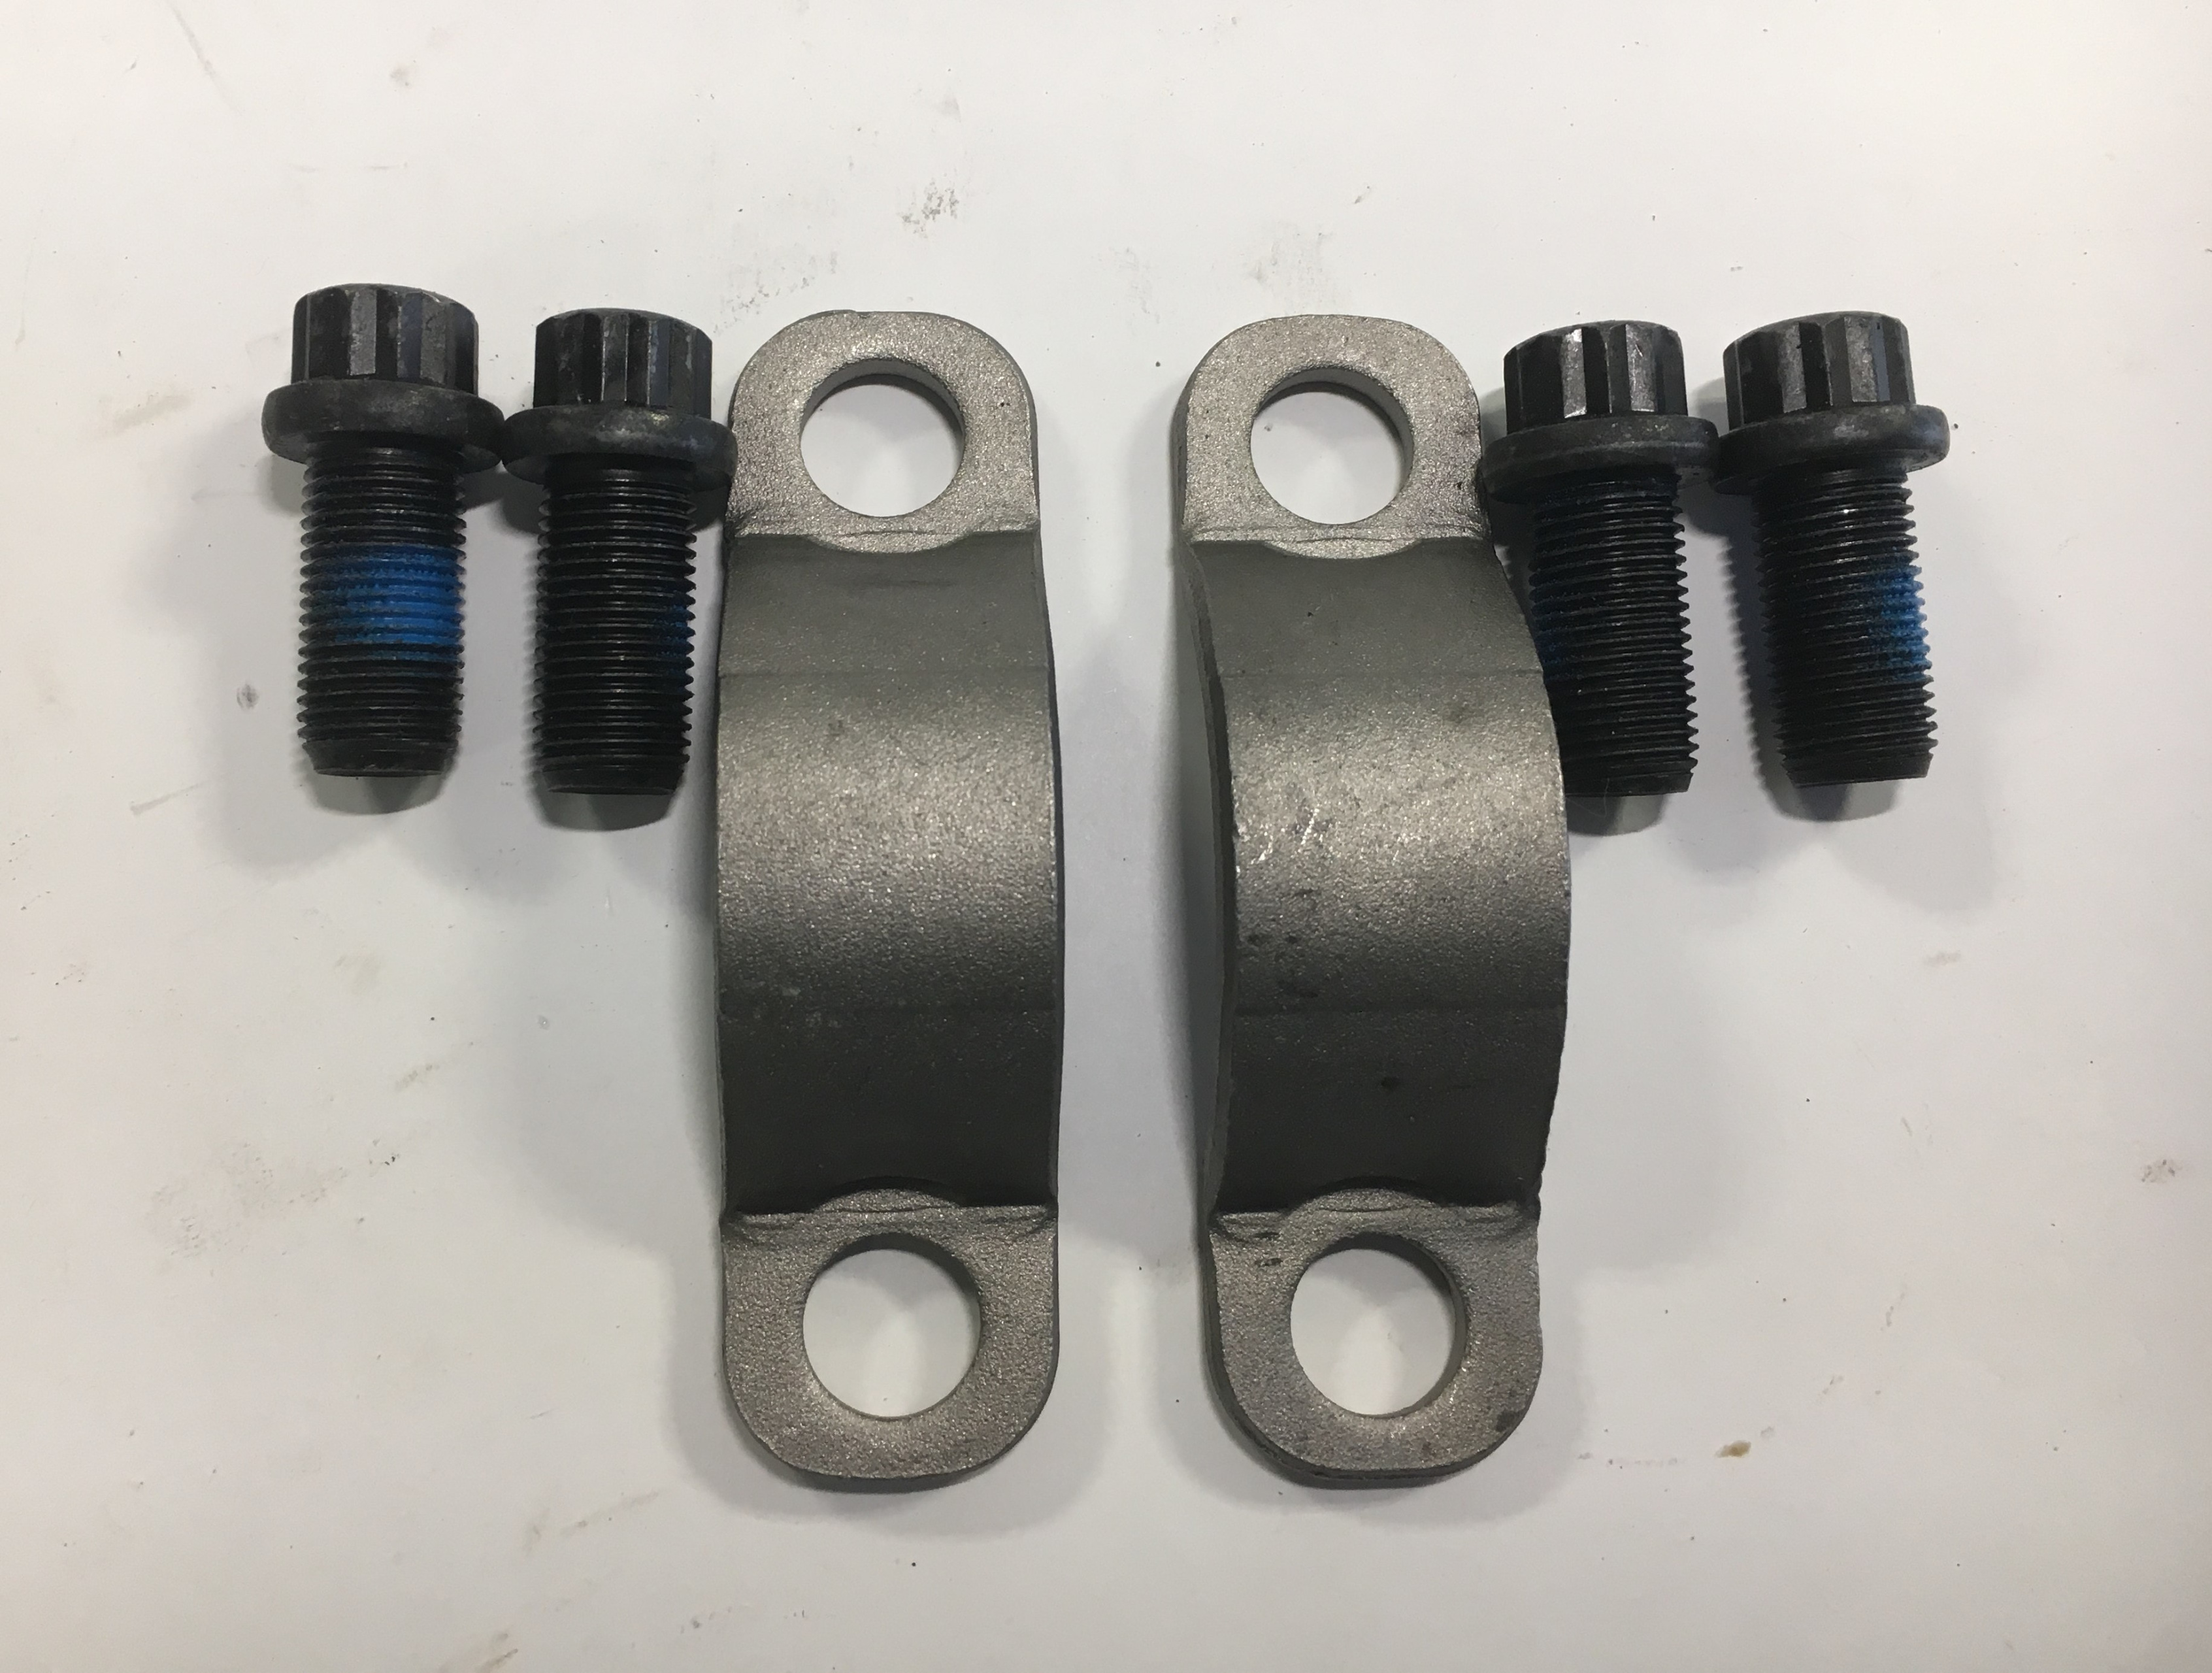 STRAP KIT 752657018X, U-JOINT 1710/17601/1810 SERIES - AVAILABILITY:  NORMALLY STOCKED ITEM